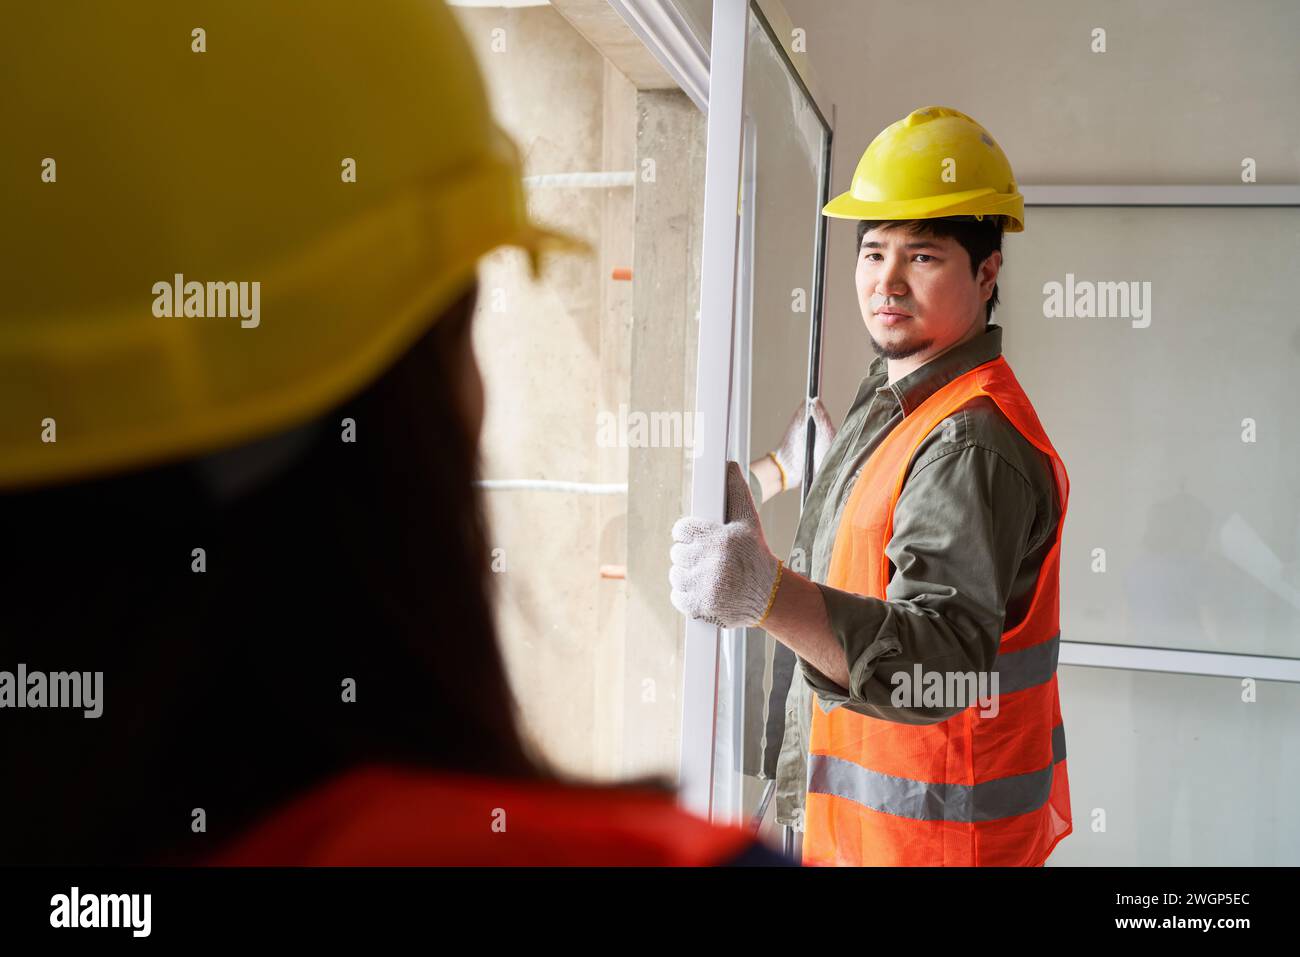 Carpenter carrying window while looking at coworker Stock Photo